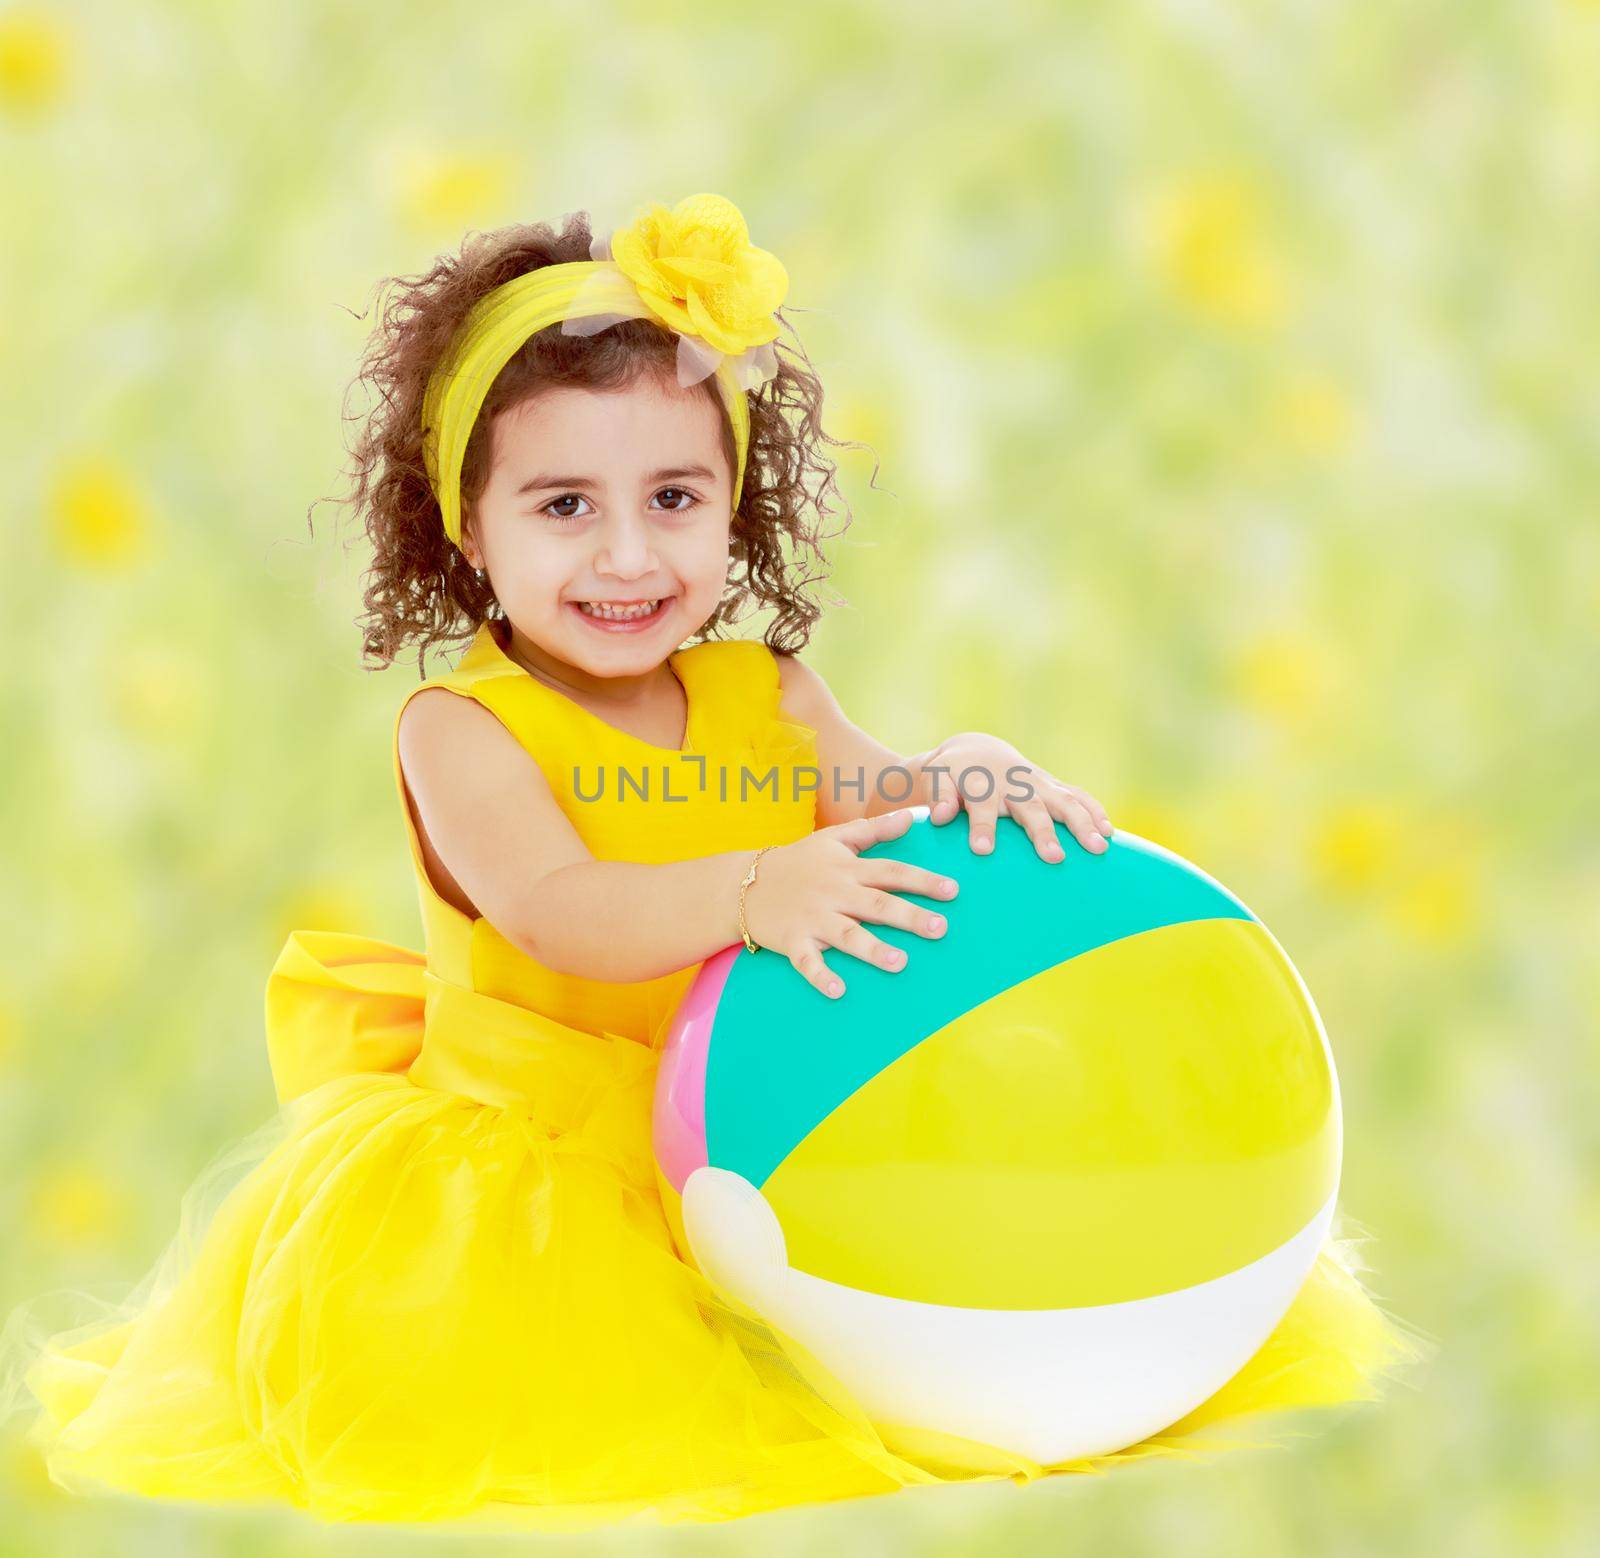 Joyful little girl in a yellow dress and bow on her head sitting on the floor. Girl hands hugging the ball.Bright,floral yellow-green blurred background.